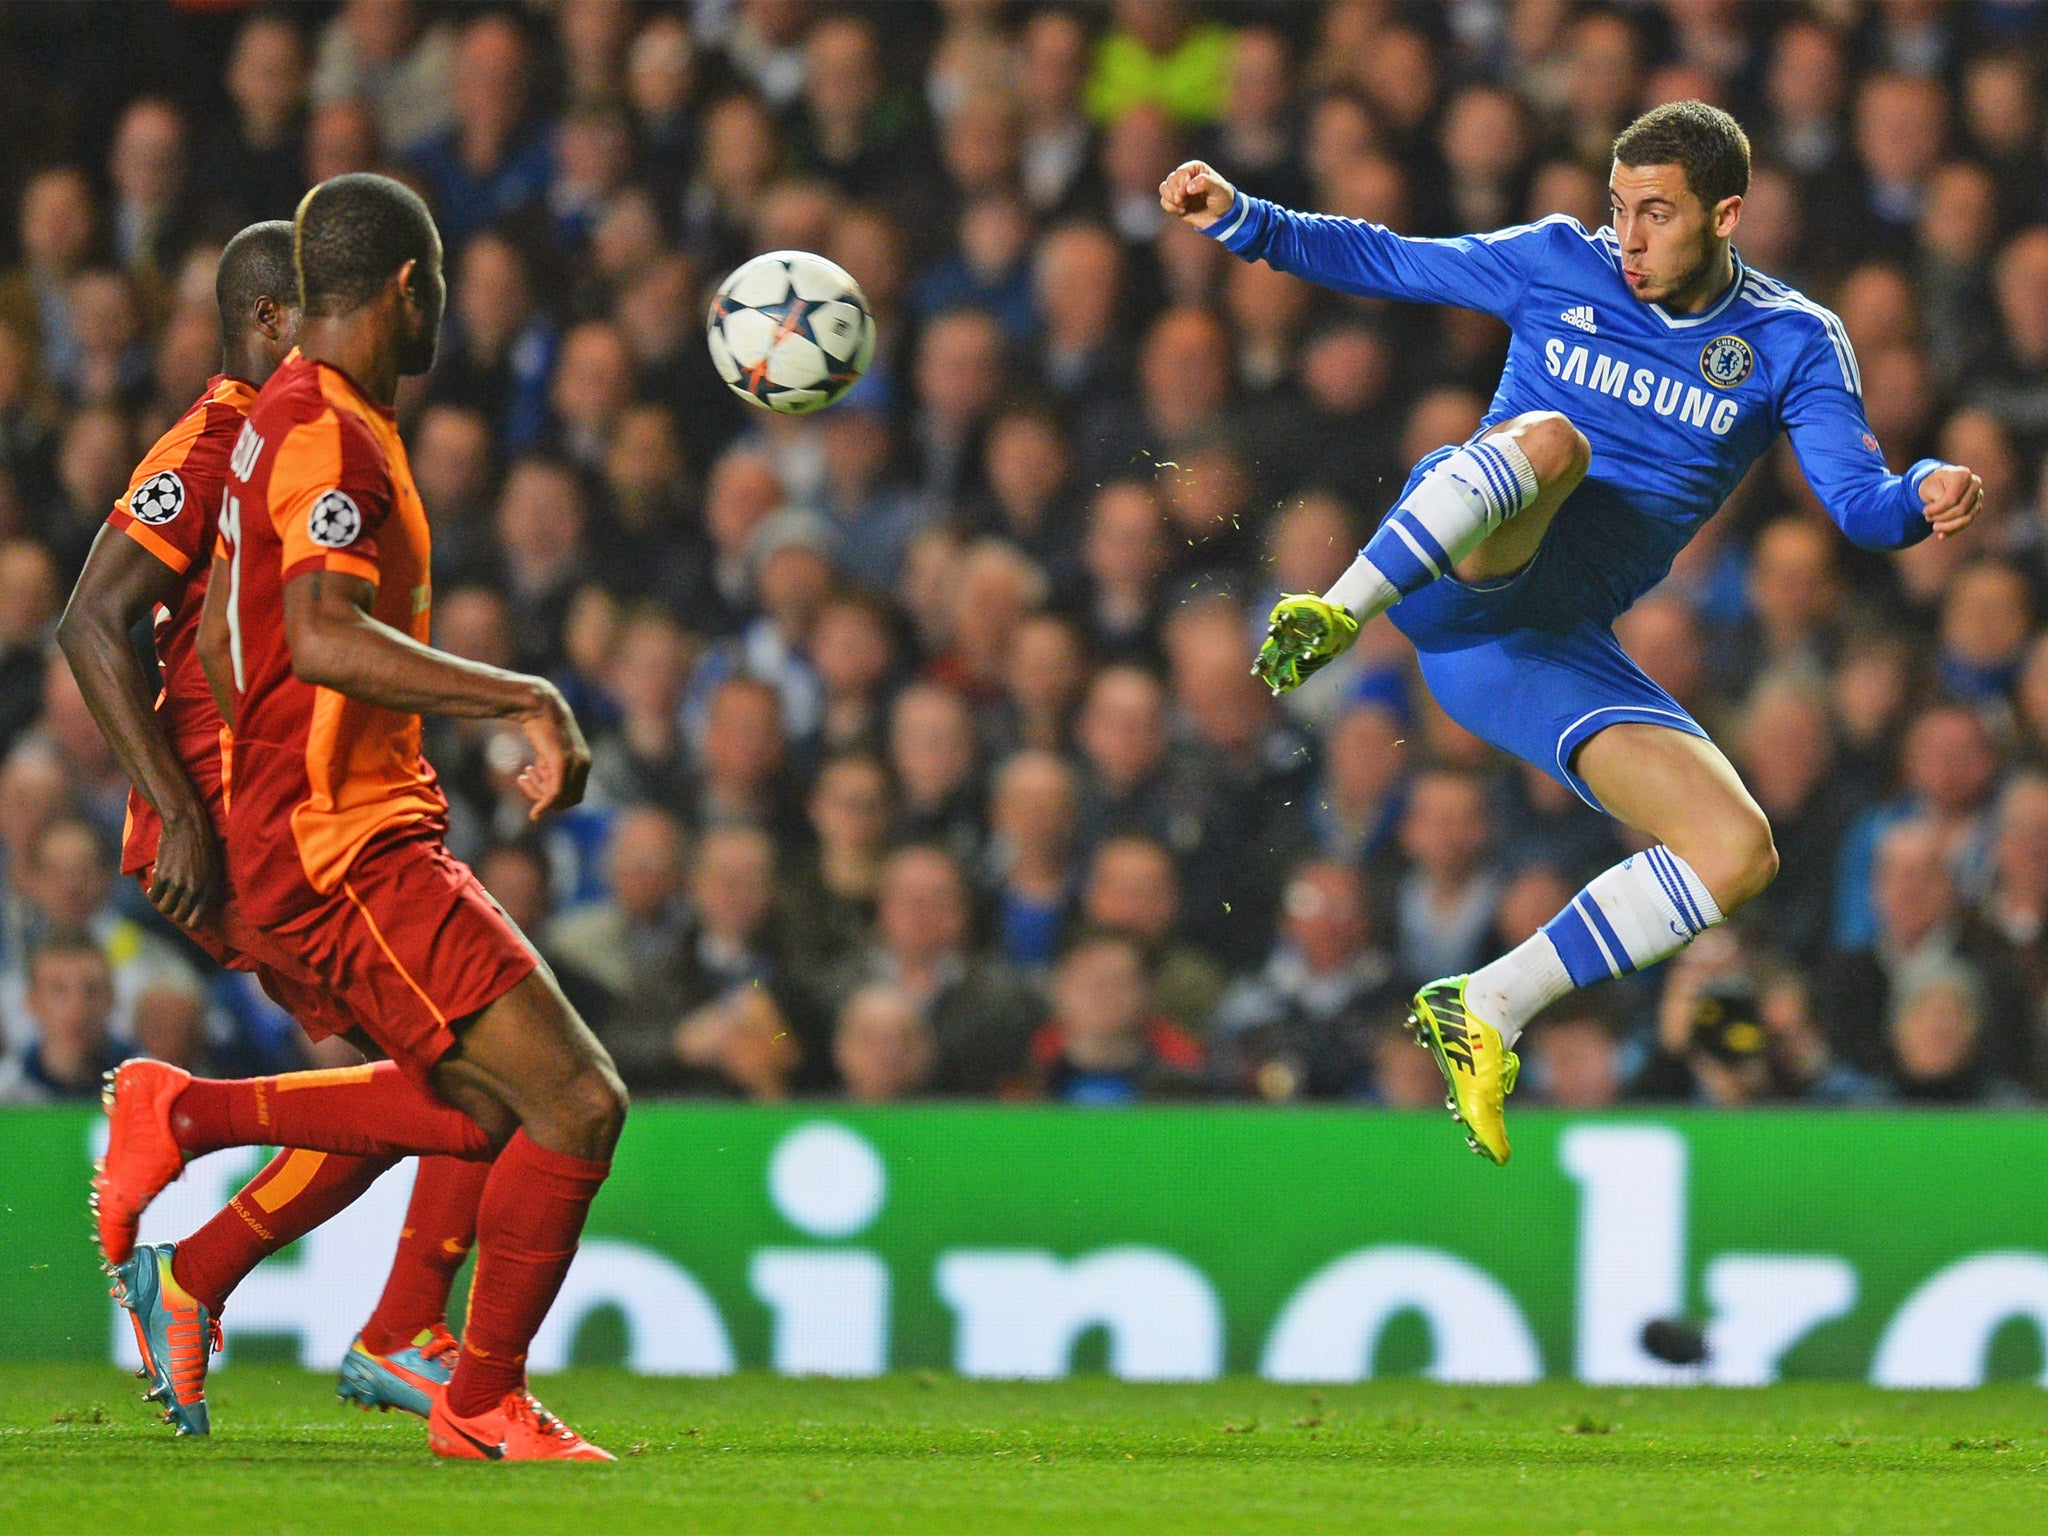 Eden Hazard was a standout player in Chelsea’s 2-0 win over Galatasaray on Tuesday night